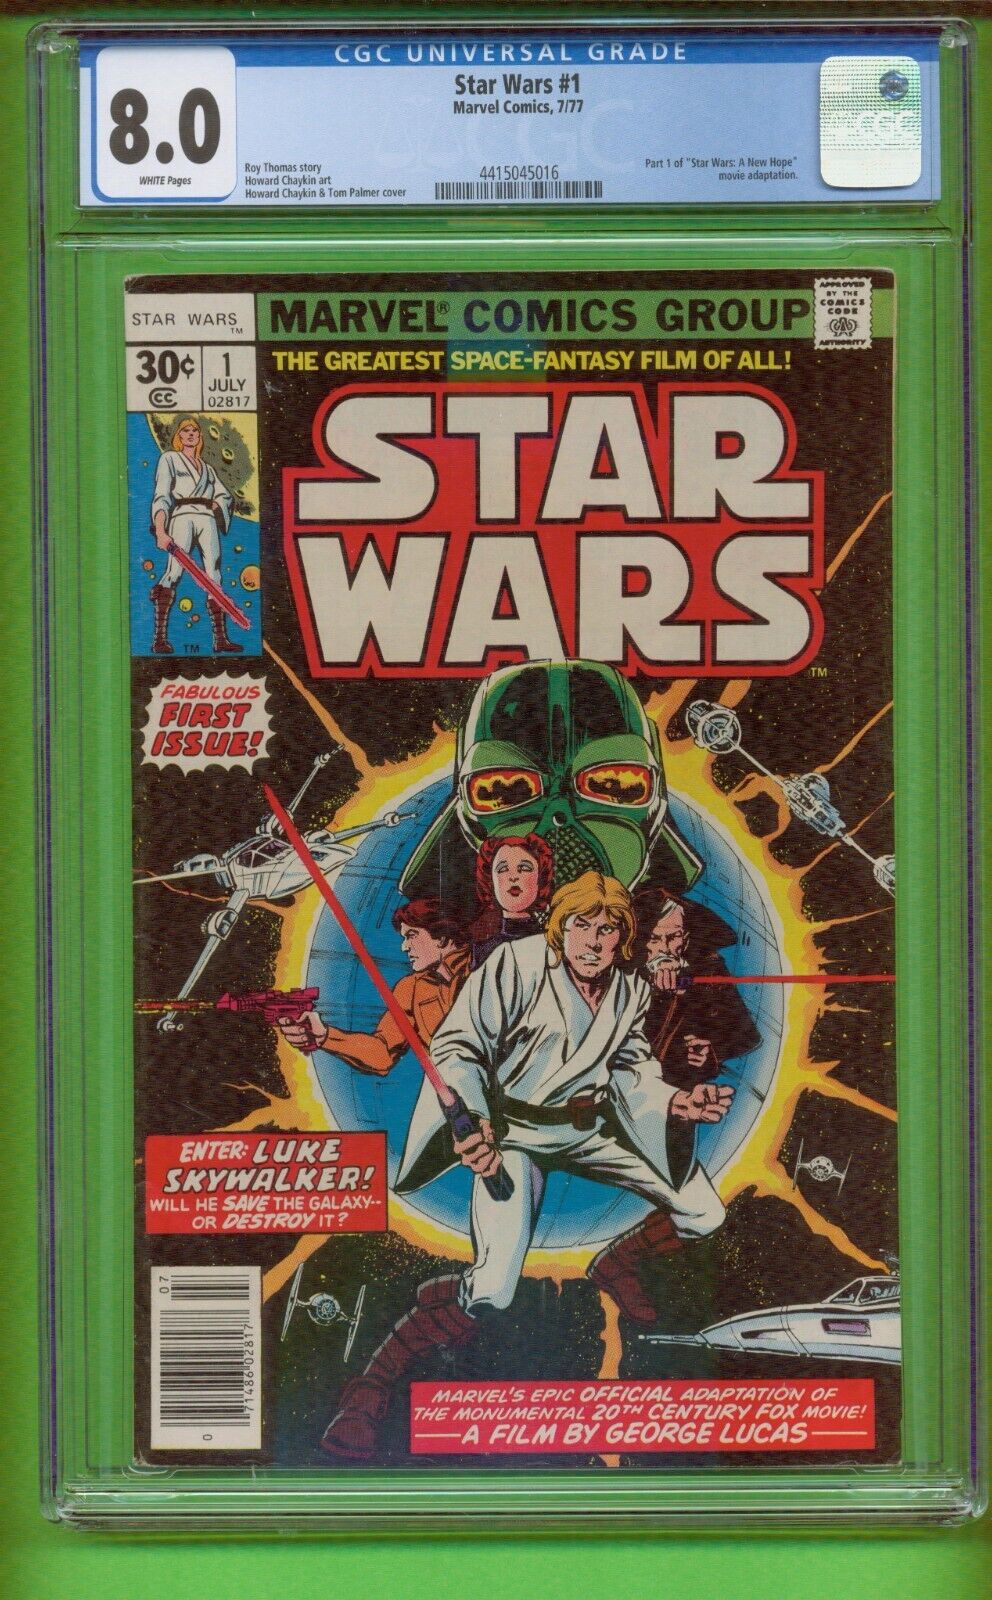 STAR WARS #1 CGC 8.0 JULY 1977 Part 1 of New Hope movie adaptation 24-590